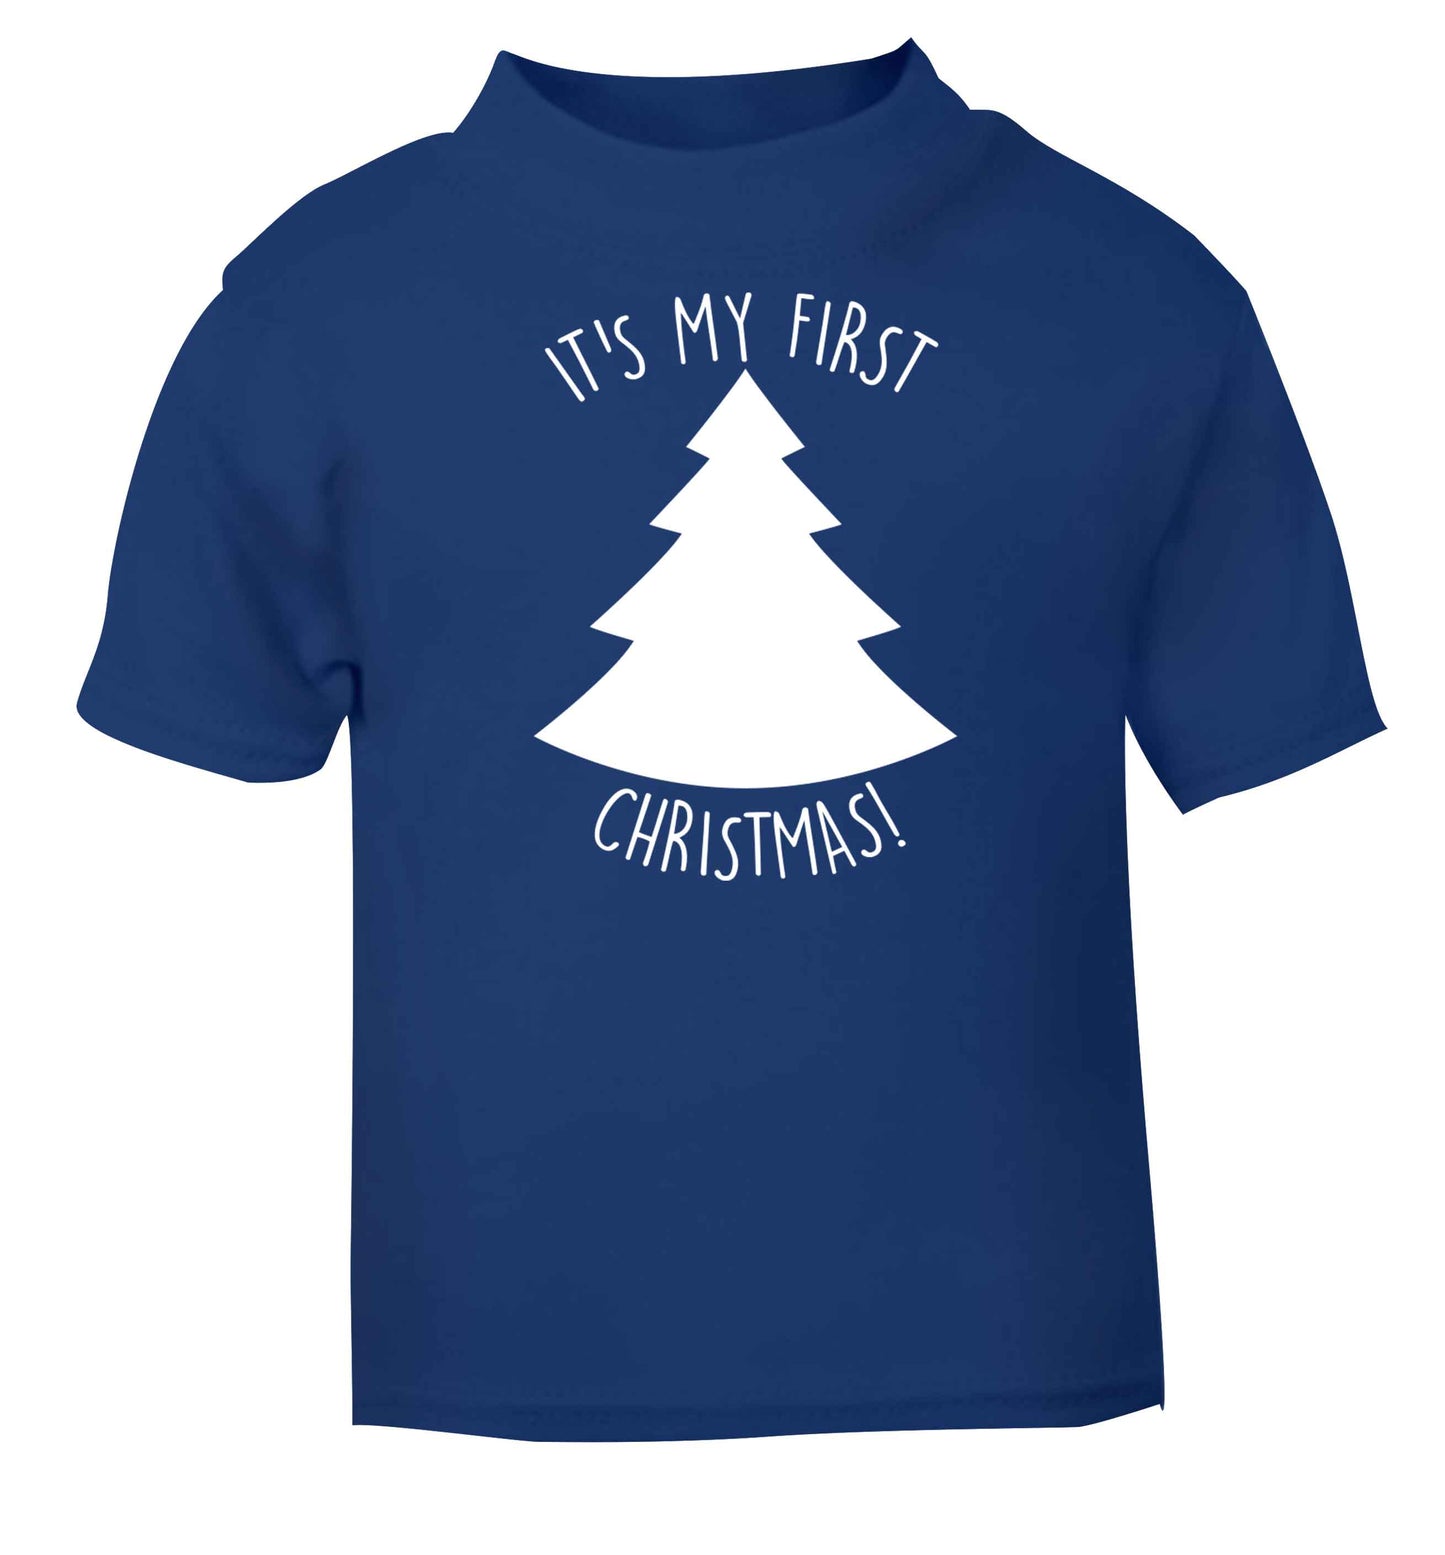 It's my first Christmas - tree blue baby toddler Tshirt 2 Years